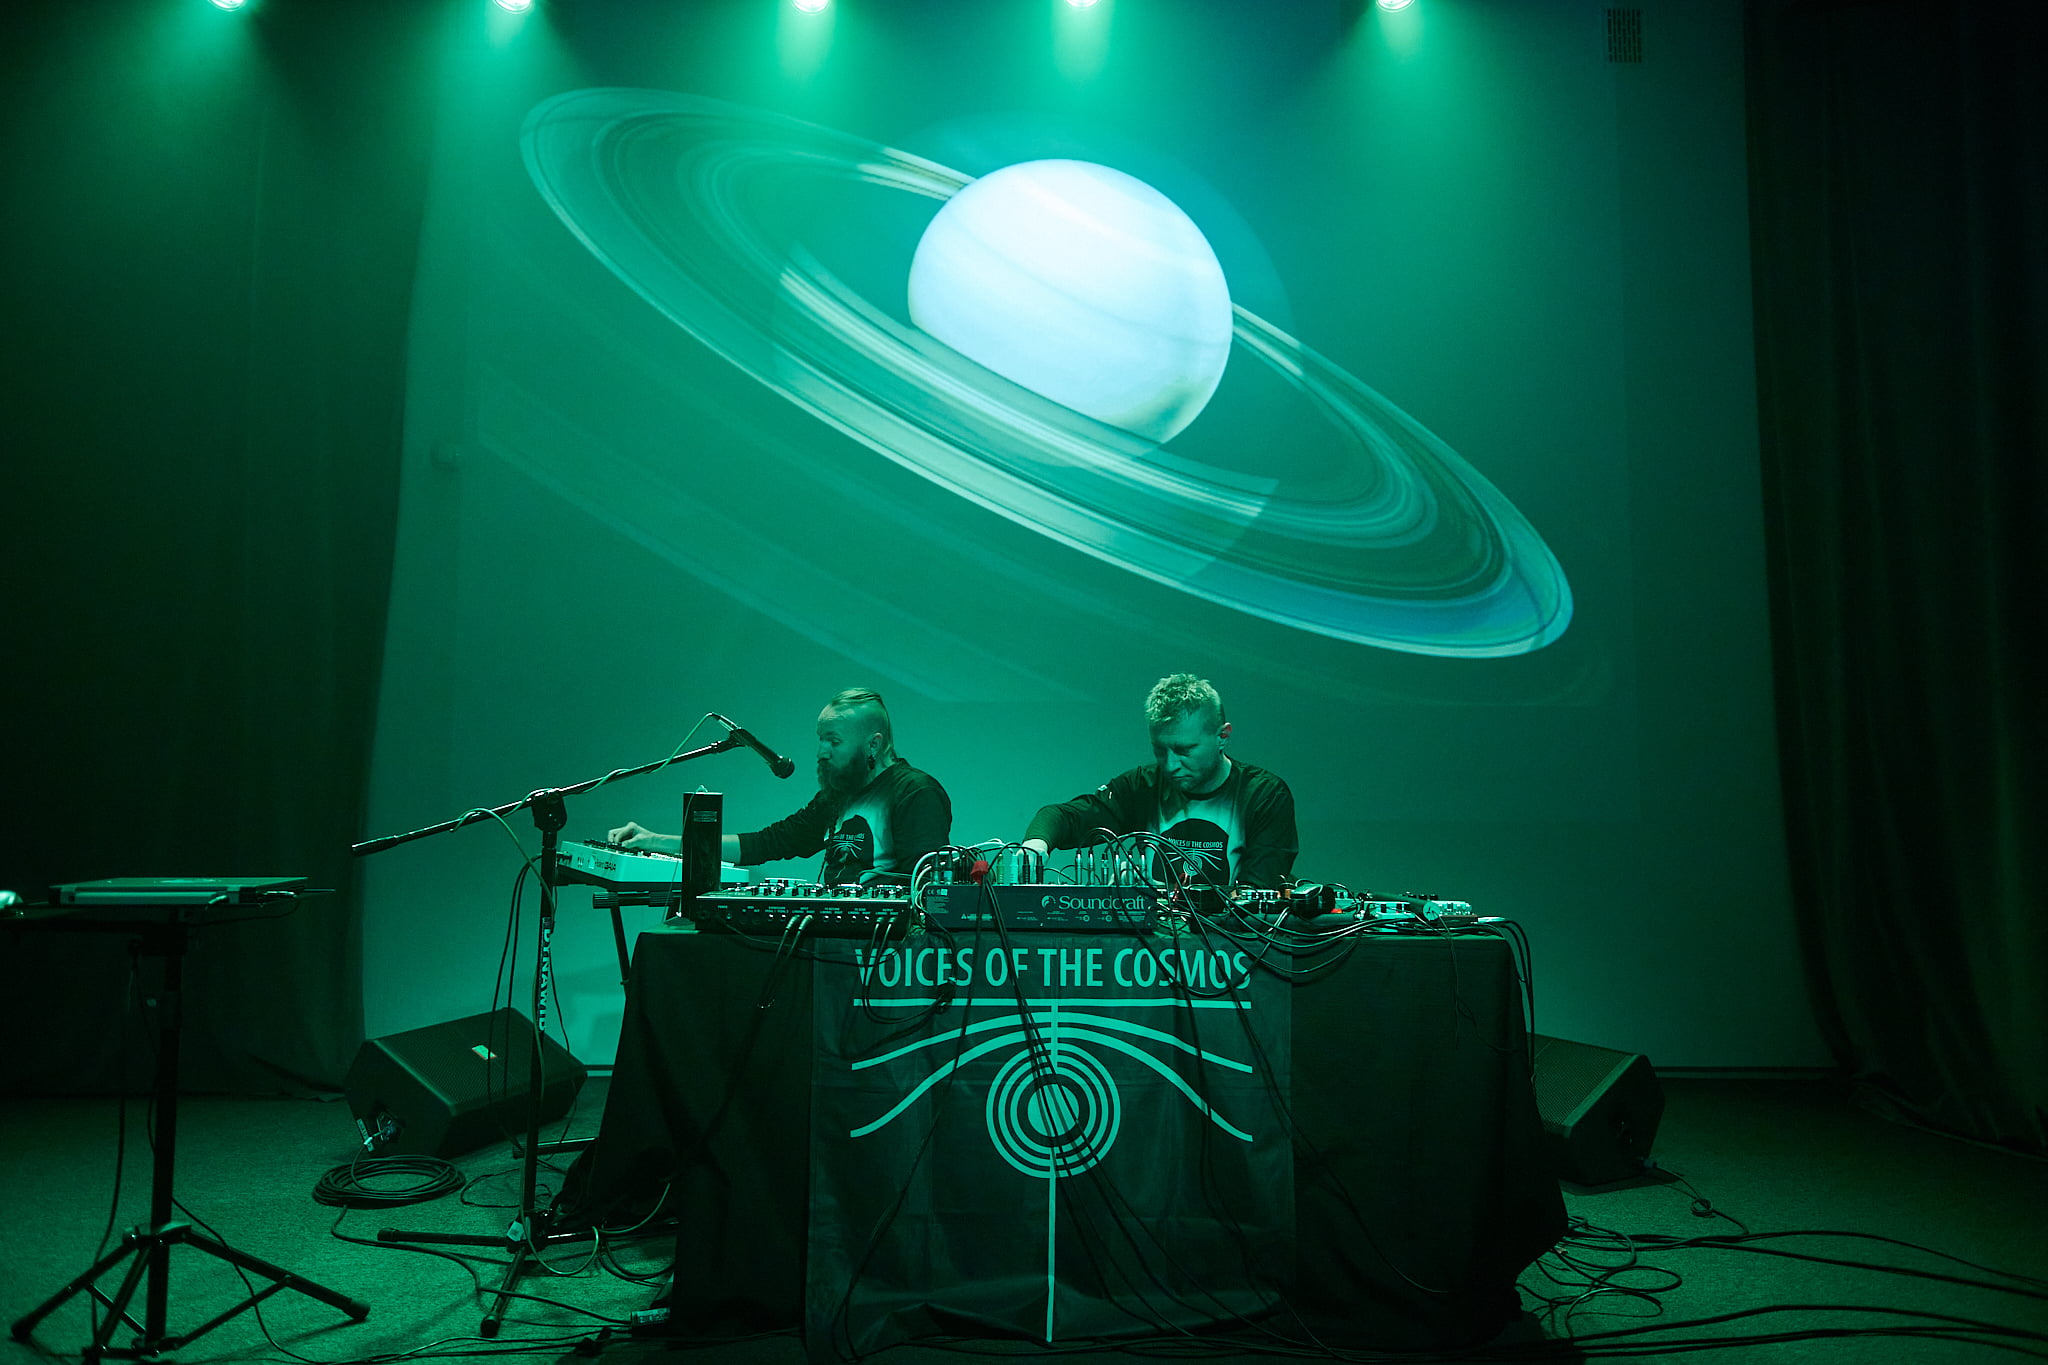 Two musicians on the stage. A planet is projected on the wall behind them, 